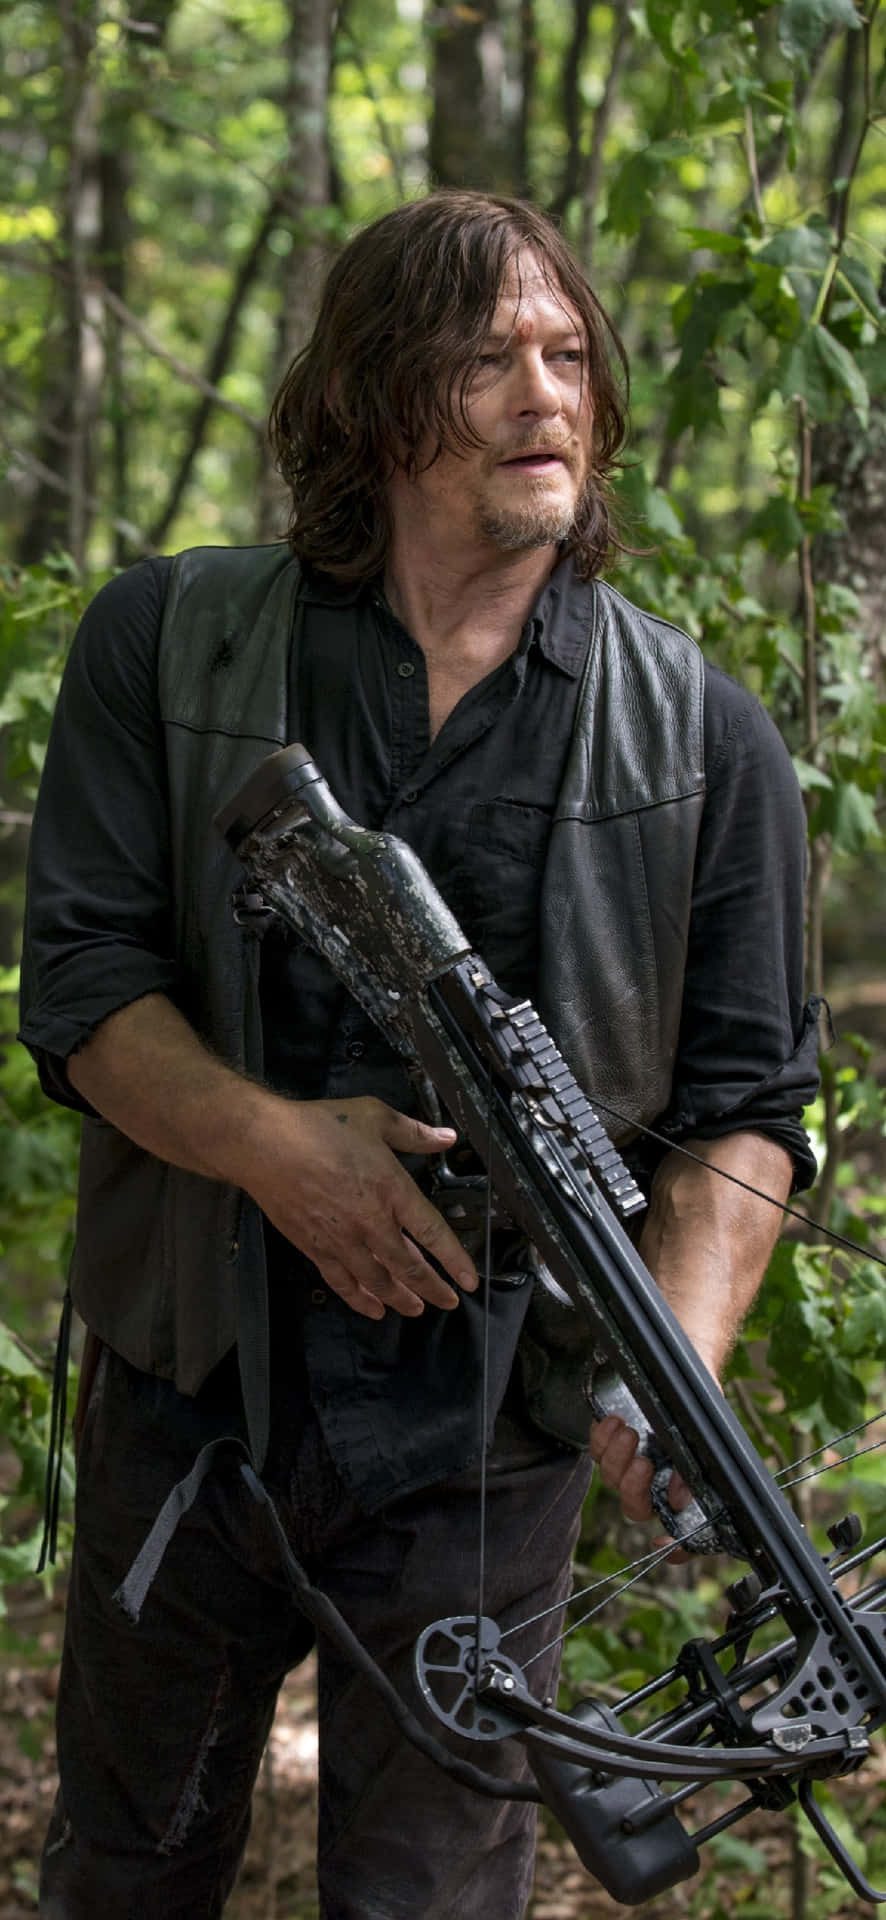 Daryl Dixon With Crossbow In Woods.jpg Wallpaper